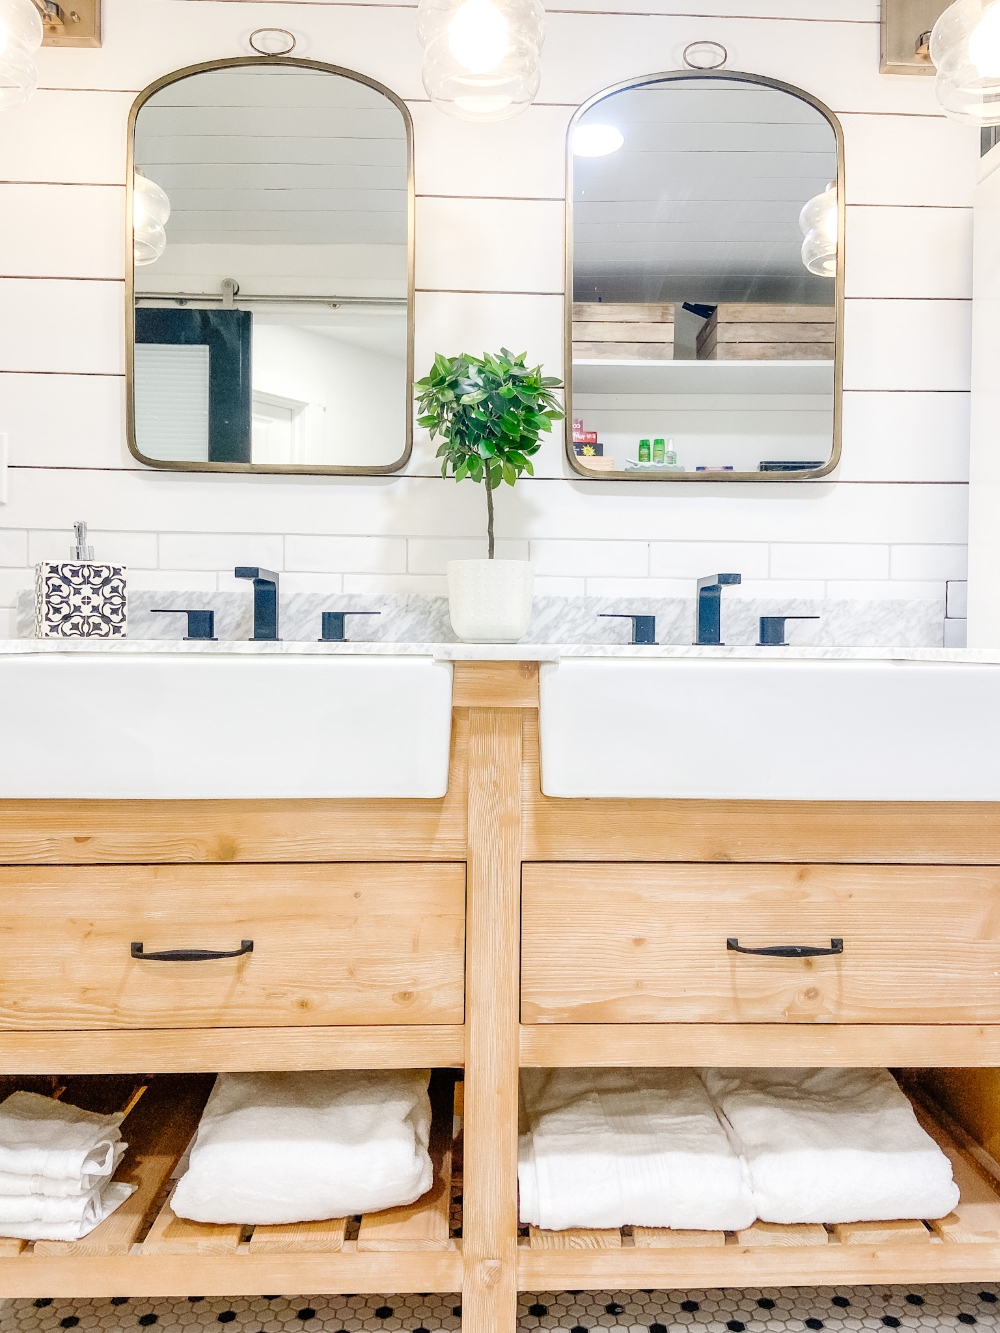 #ad I'm sharing a sneak peek of our finished airbnb kitchen! I partnered with @PeerlessFaucet. We installed the timeless and fresh Elmhurst wall-mounted faucet in our kitchen and modern Xander bath faucet and tub hardware in the bathroom! We love how Peerless faucets have upgraded our airbnb remodel! 

